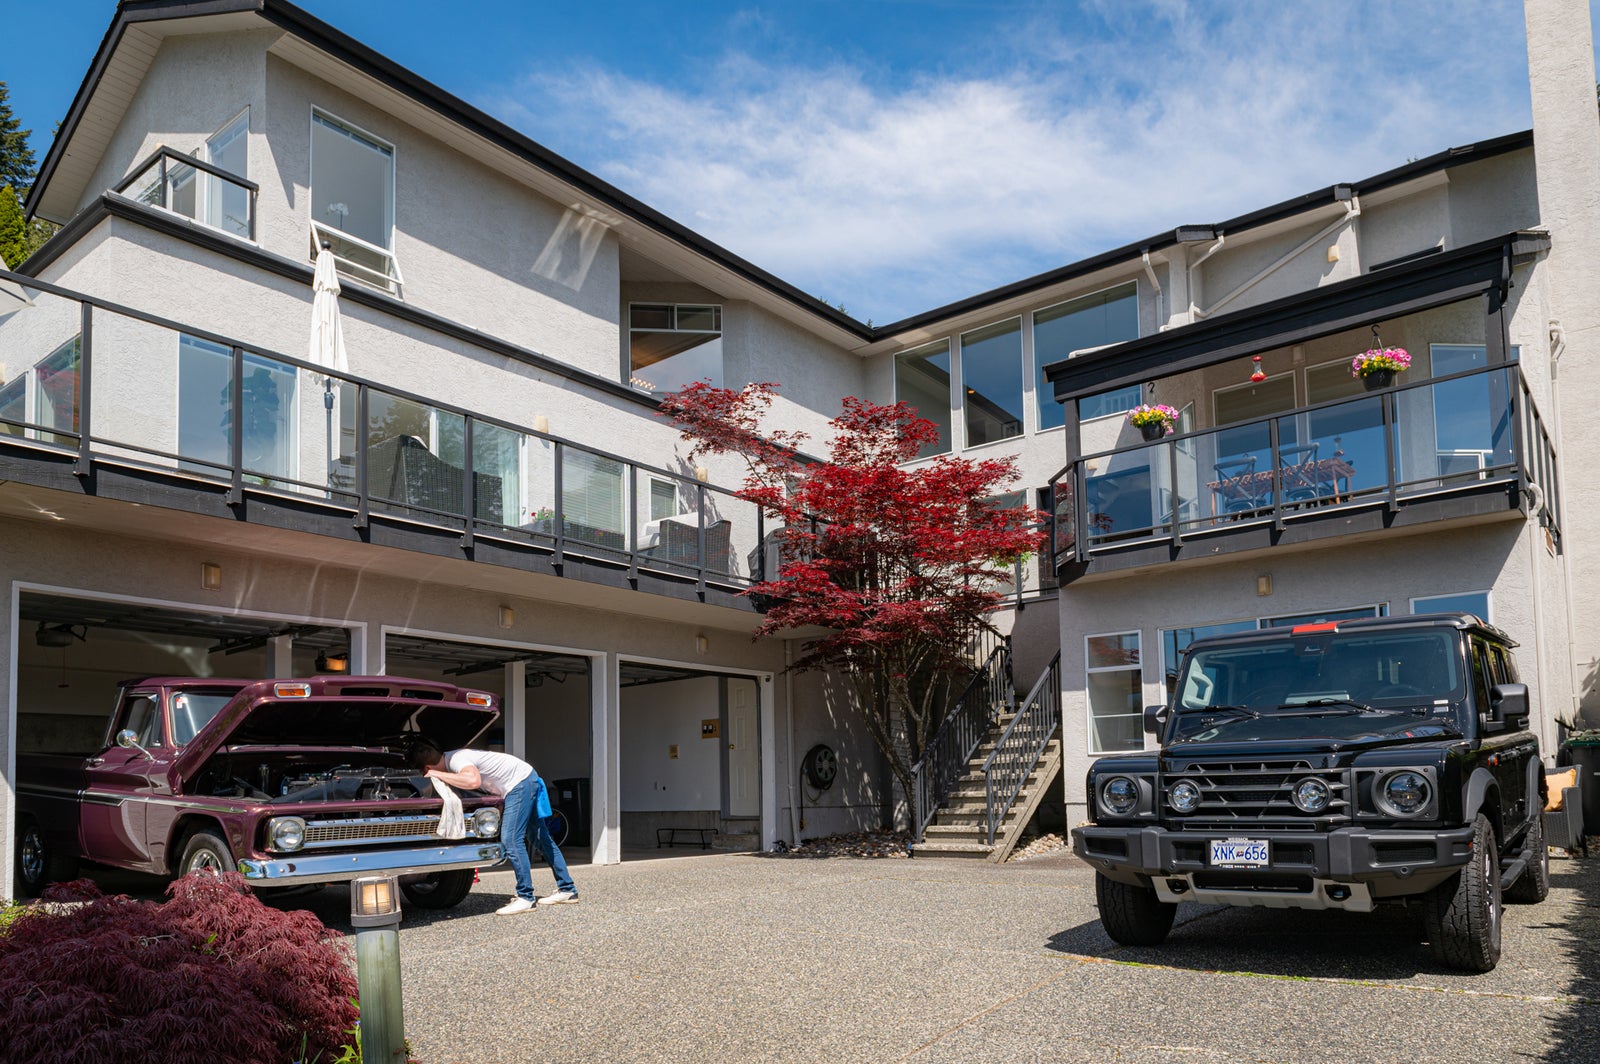 Man working on Truck 4210 Starlight Way, North Vancouver Real Estate by Local Realtor Brandon Crichton